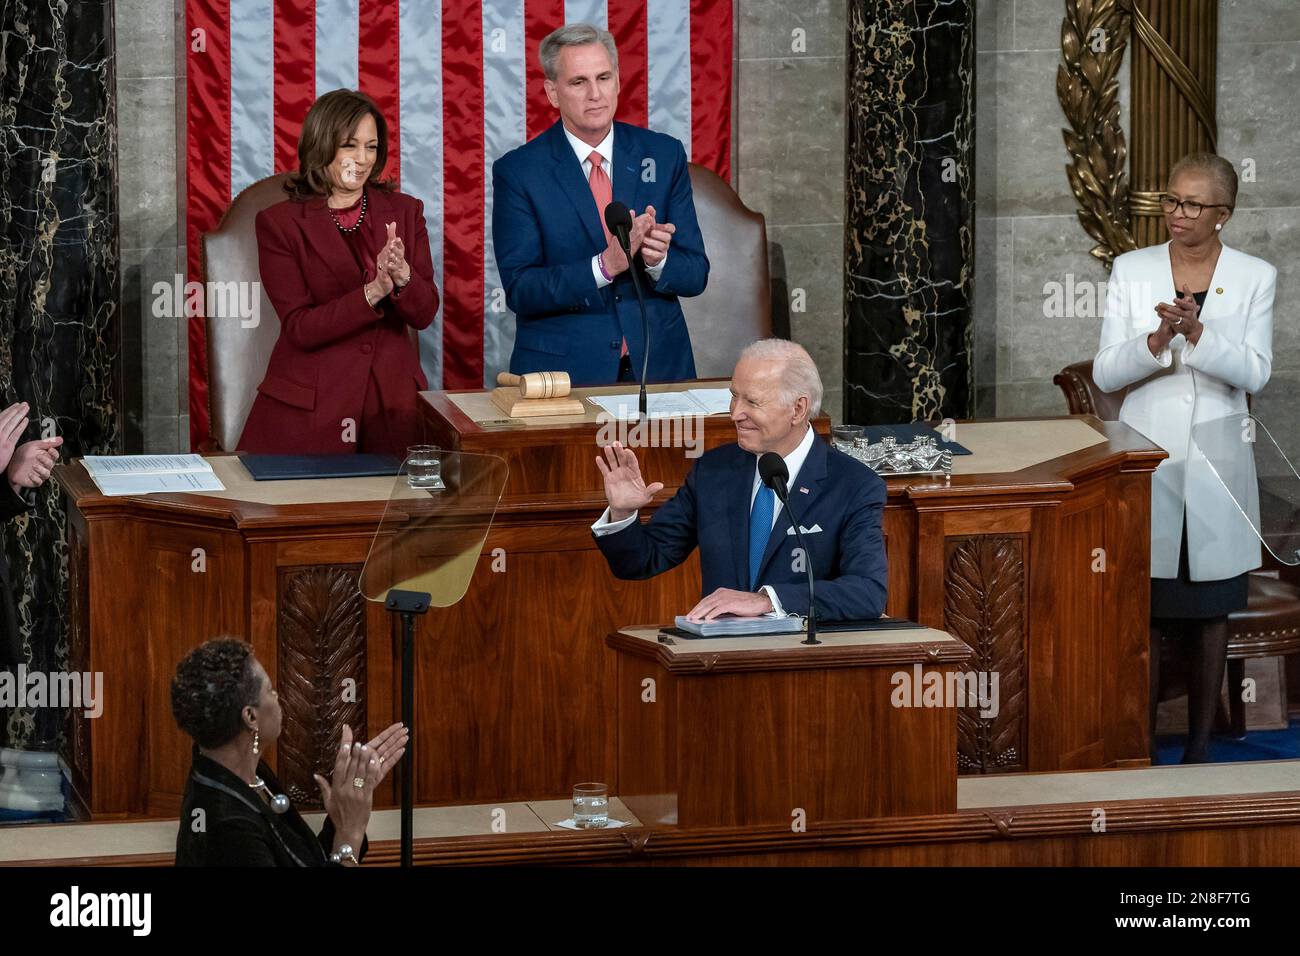 Washington, United States Of America. 07th Feb, 2023. Washington, United States of America. 07 February, 2023. U.S President Joe Biden delivers his State of the Union address to the joint session of Congress, February 7, 2023 in Washington, DC Vice President Kamala Harris, left, and Speaker Kevin McCarthy, right, sit behind. Credit: Carlos Fyfe/White House Photo/Alamy Live News Stock Photo